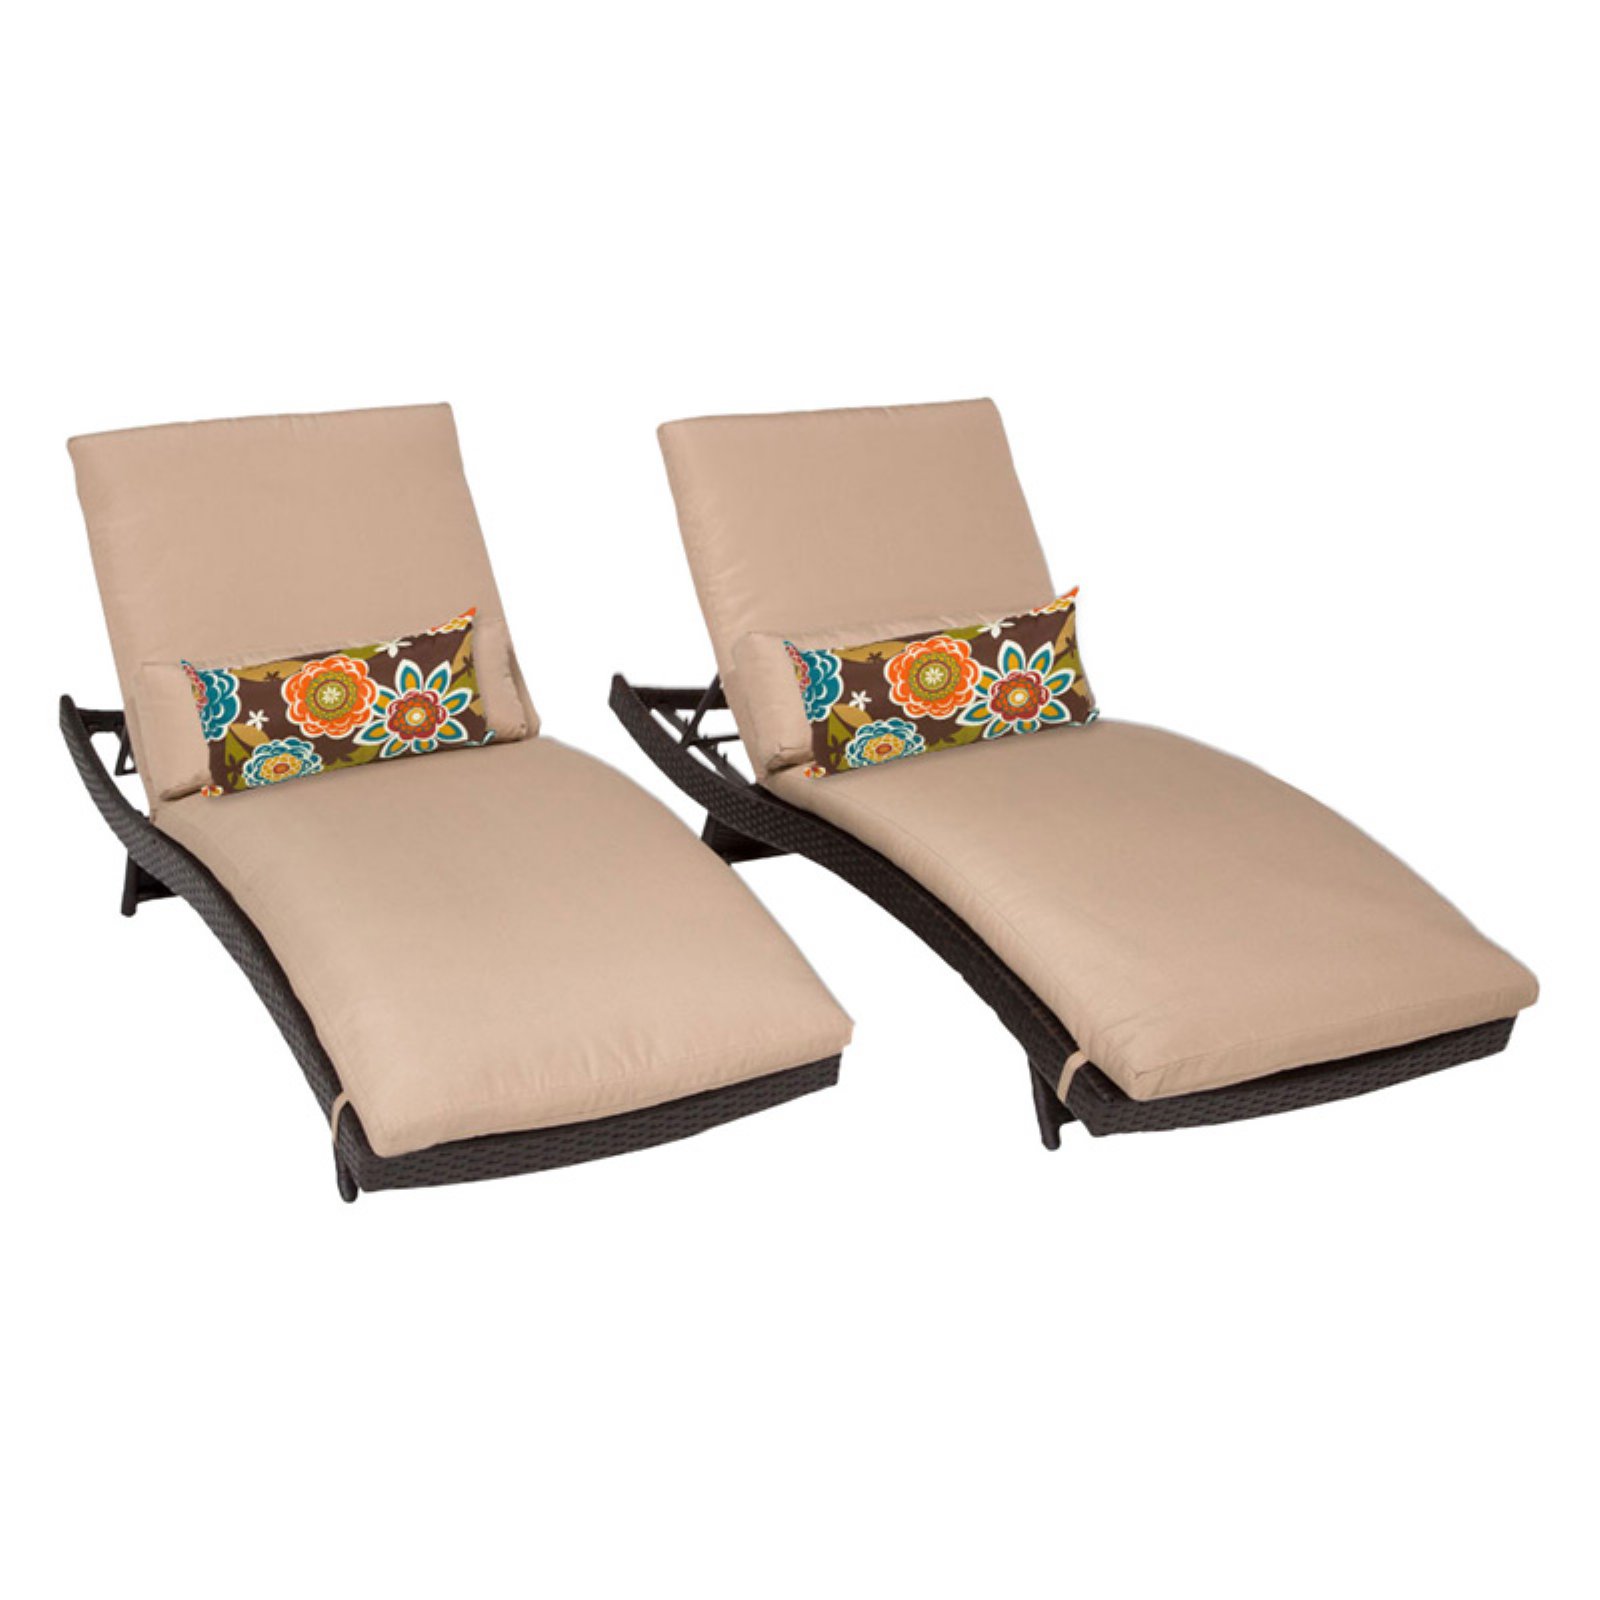 TK Classics Bali Adjustable Outdoor Chaise Lounge - Set of 2 Chairs and Cushion Covers - image 1 of 2